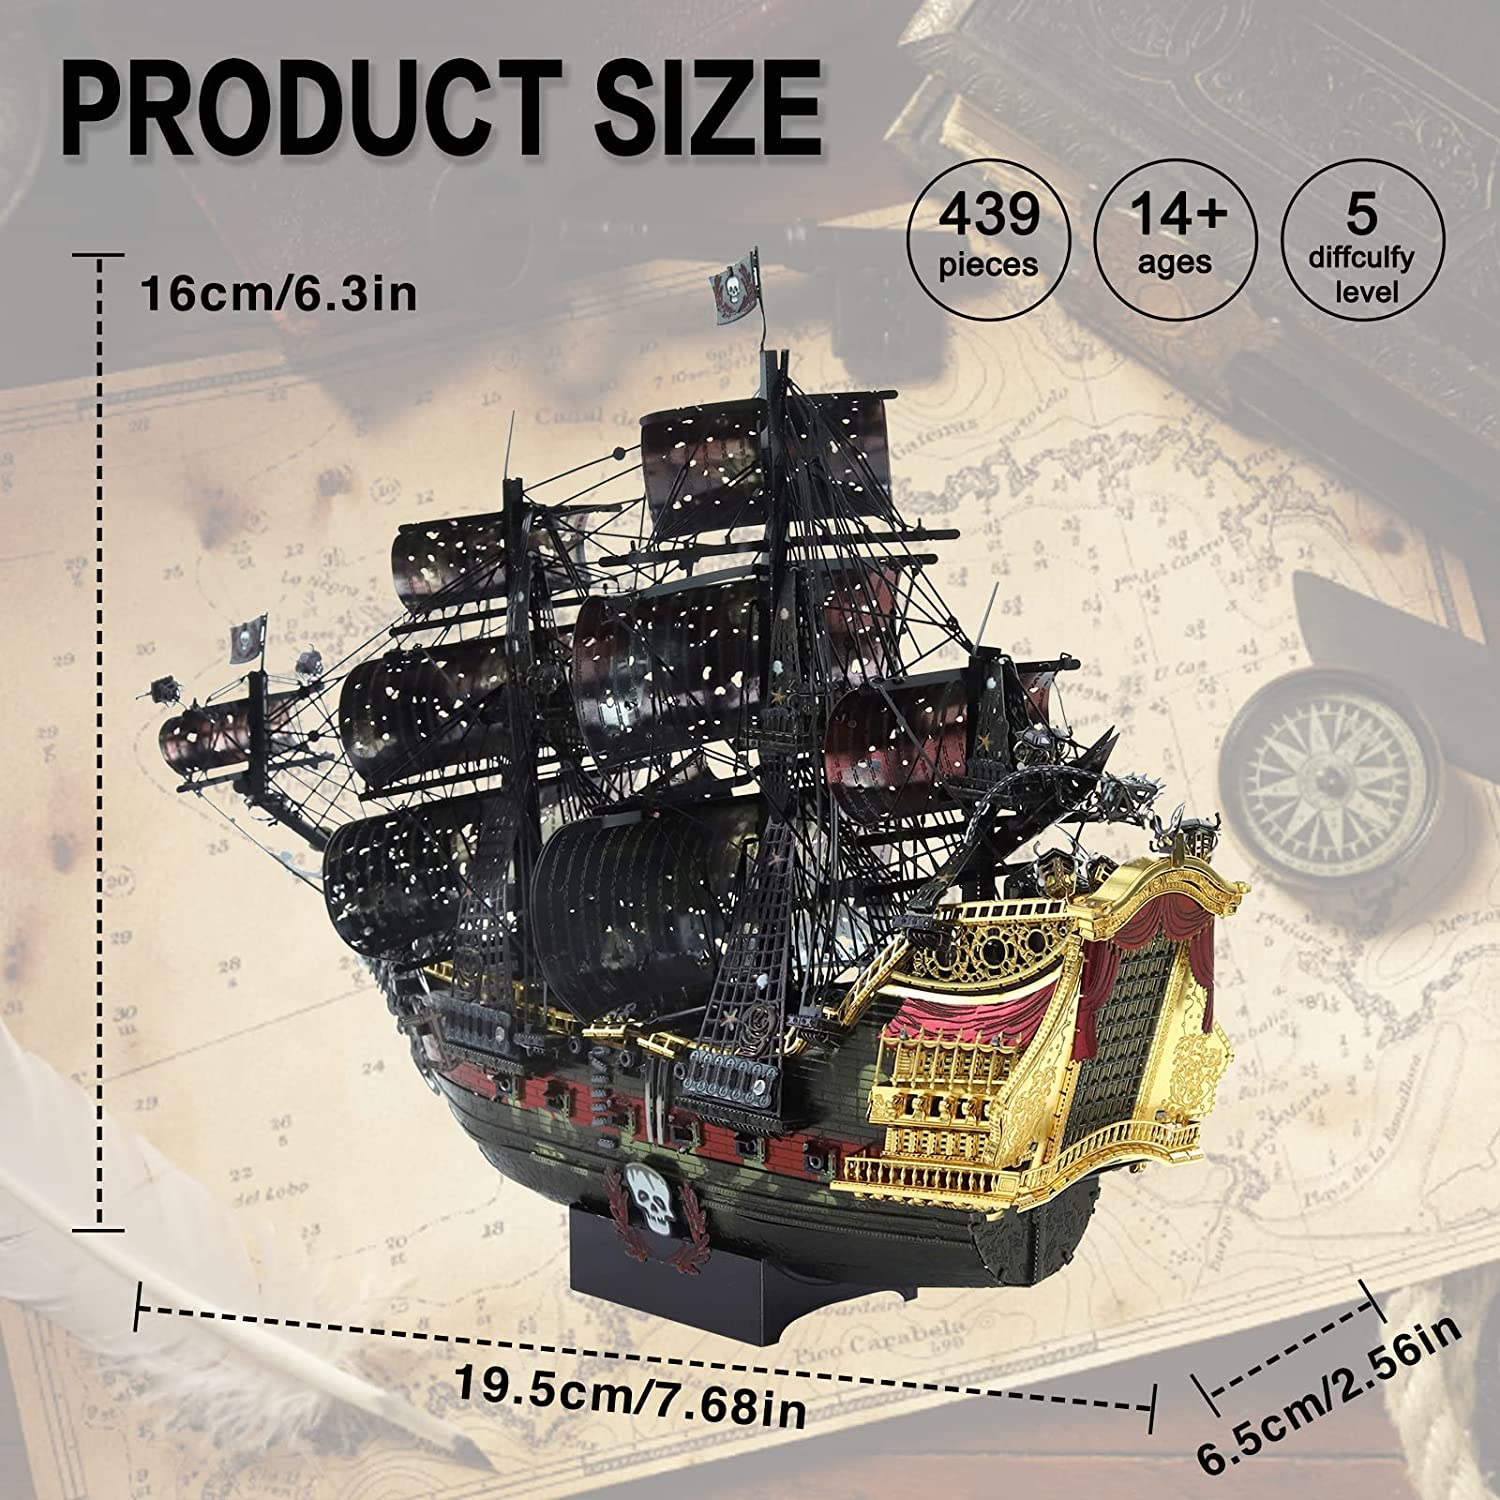 SmartBabyKid™ Queen Anne's Revenge Pirate Ship Model Kits with DIY Tools Set